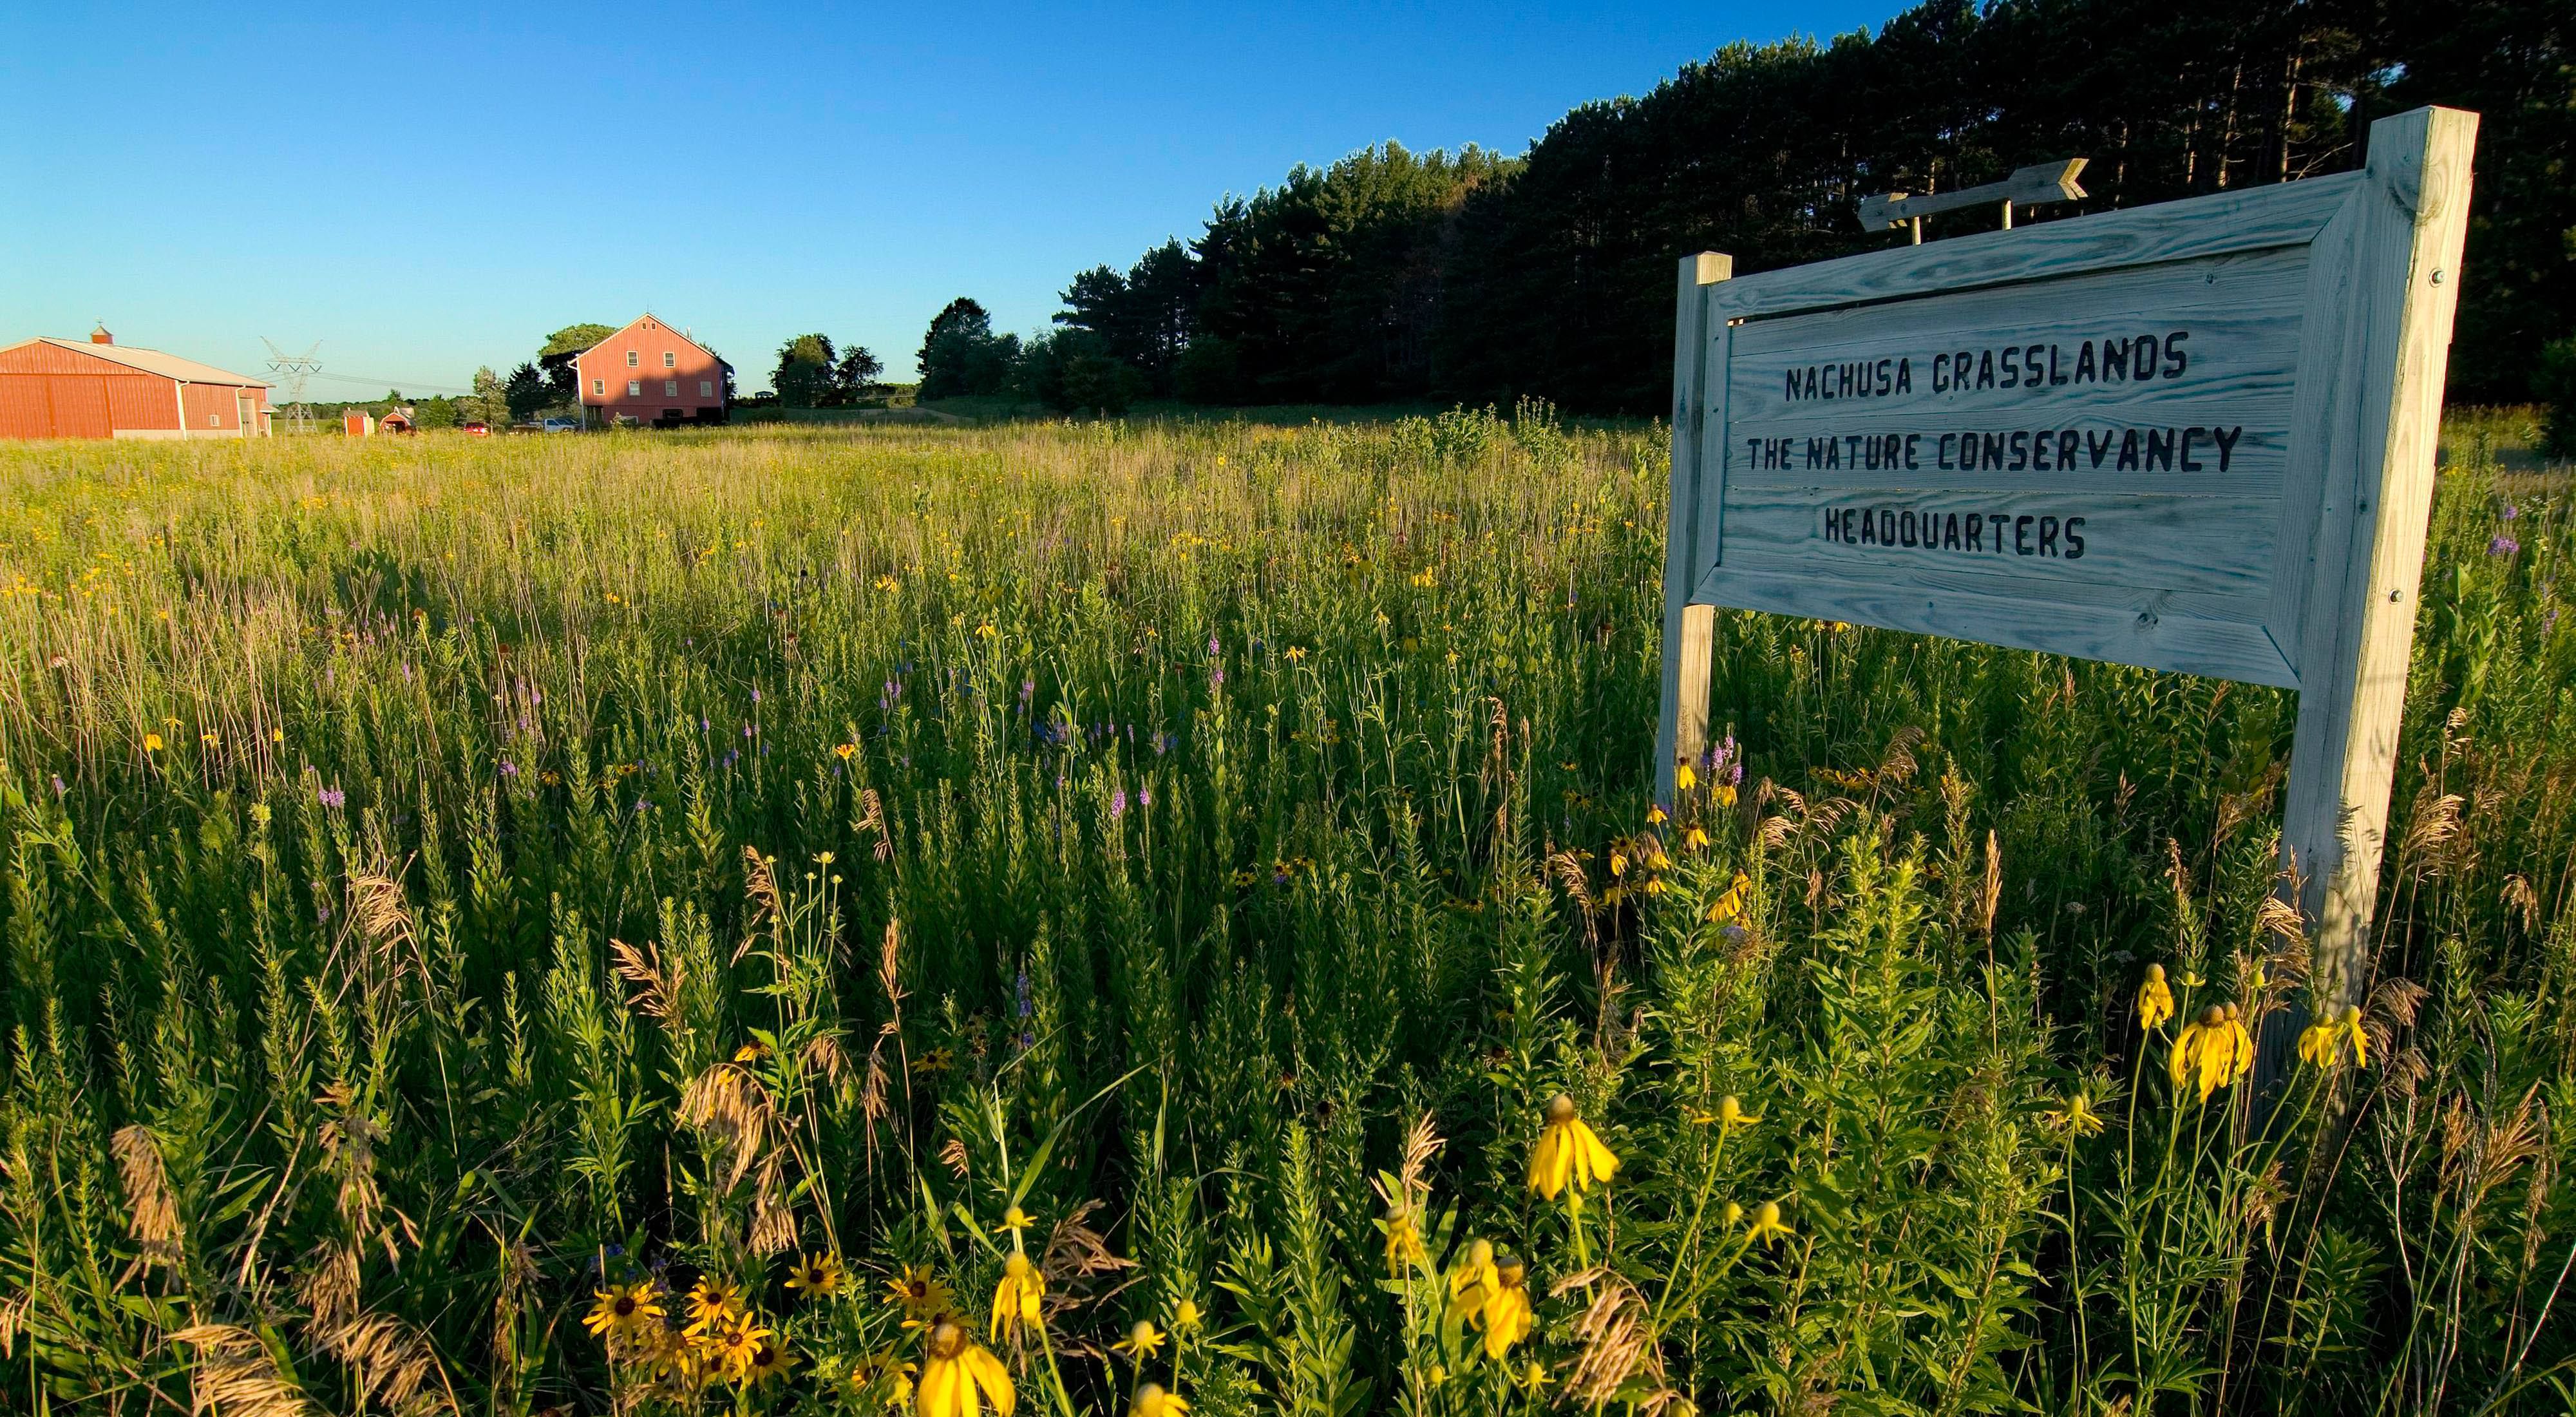 A sign stands in the prairie reading Nachusa Grasslands, The Nature Conservancy Headquarters.